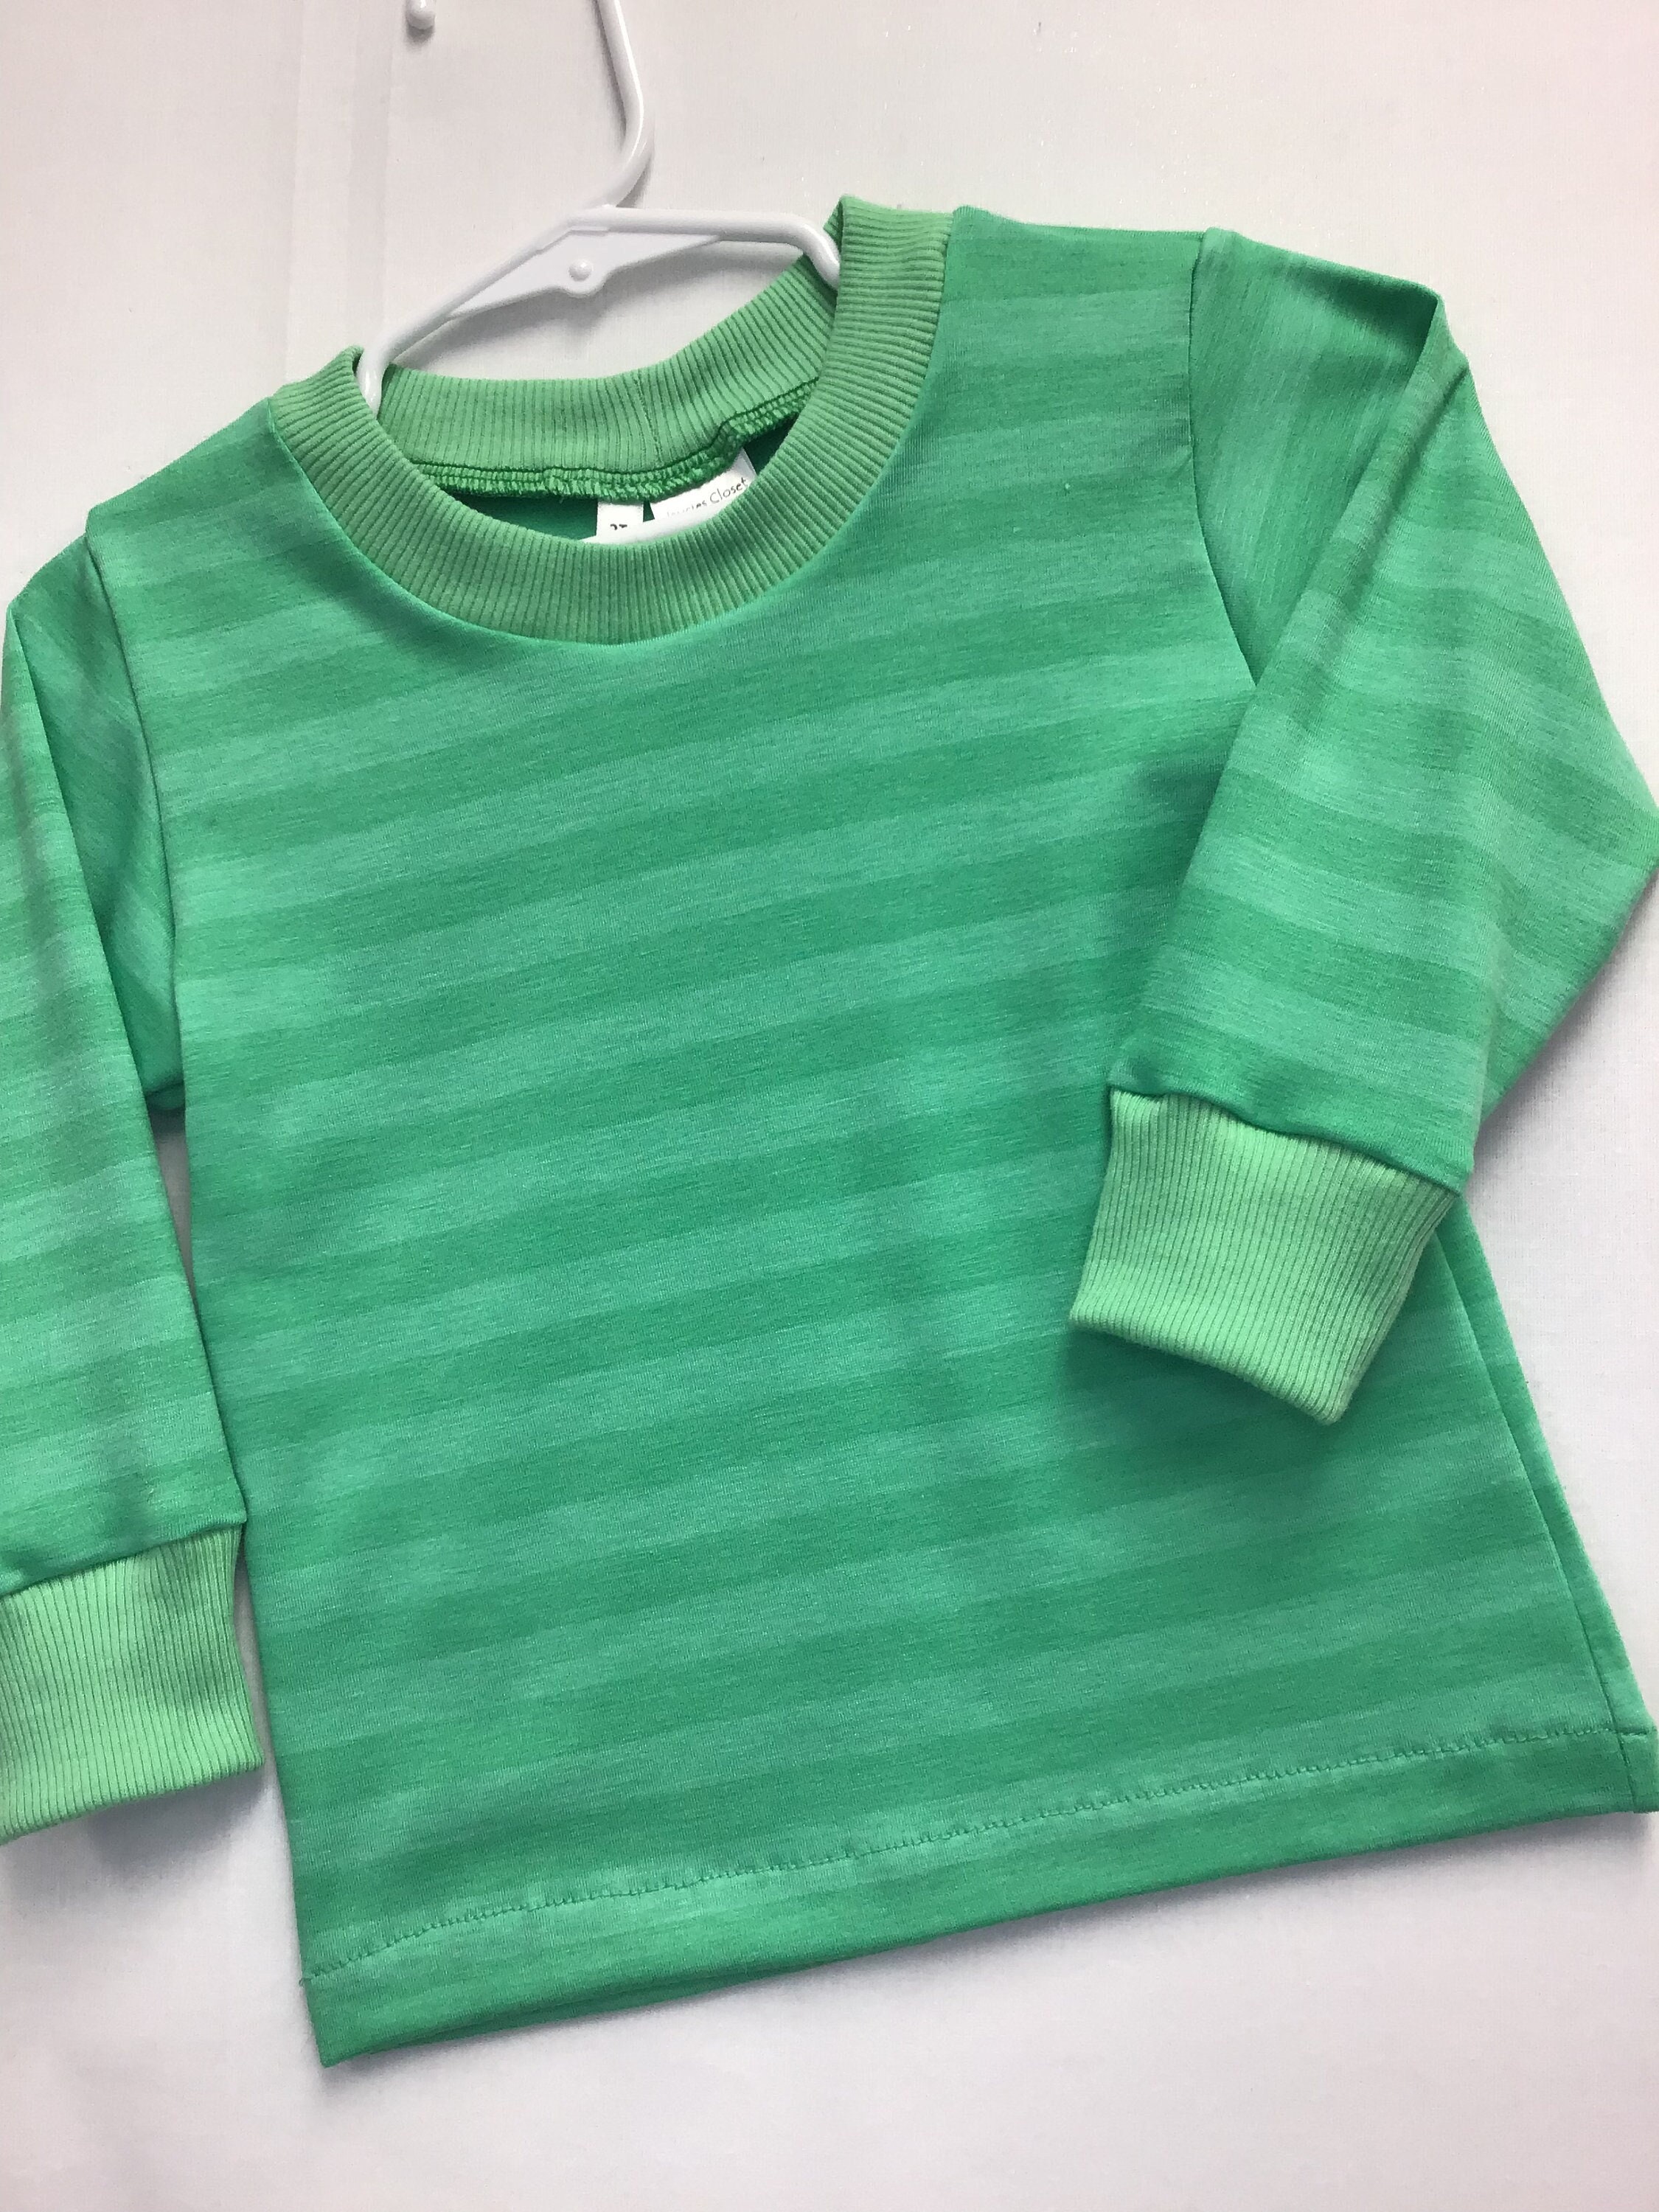 Two Tone Striped Baby - and Green, Toddler Etsy T-shirt